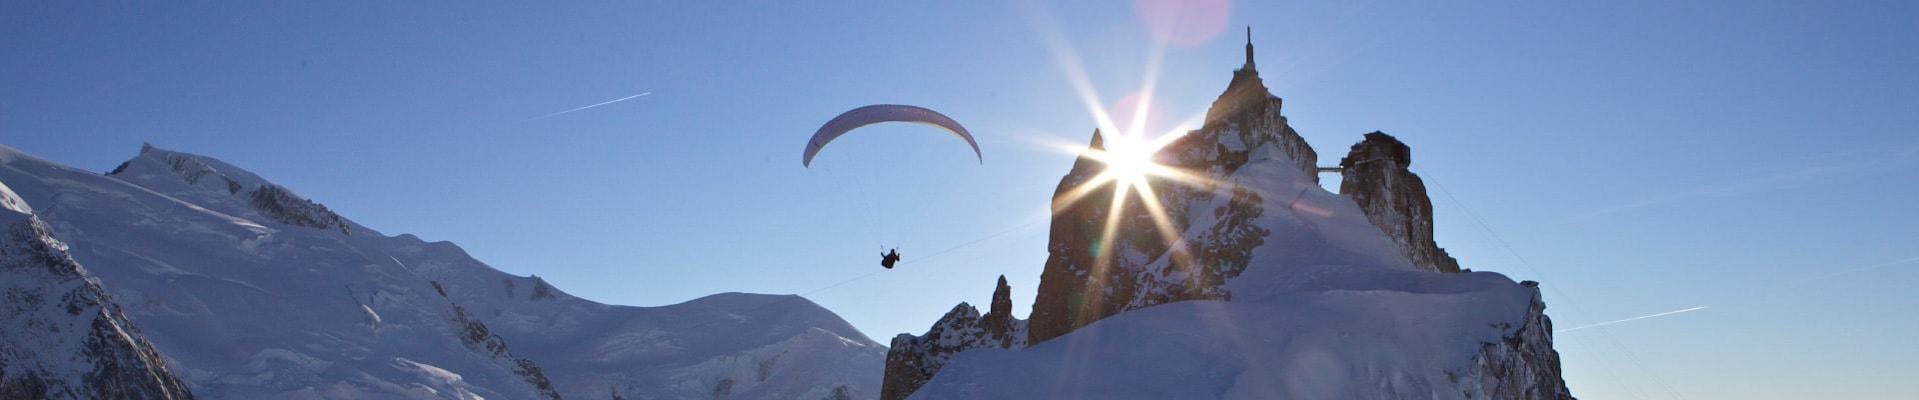 A paragliding pilot from Kailash Paragliding is doing a Tandem Paragliding Flight from the Aiguille du midi against a mountain backdrop.